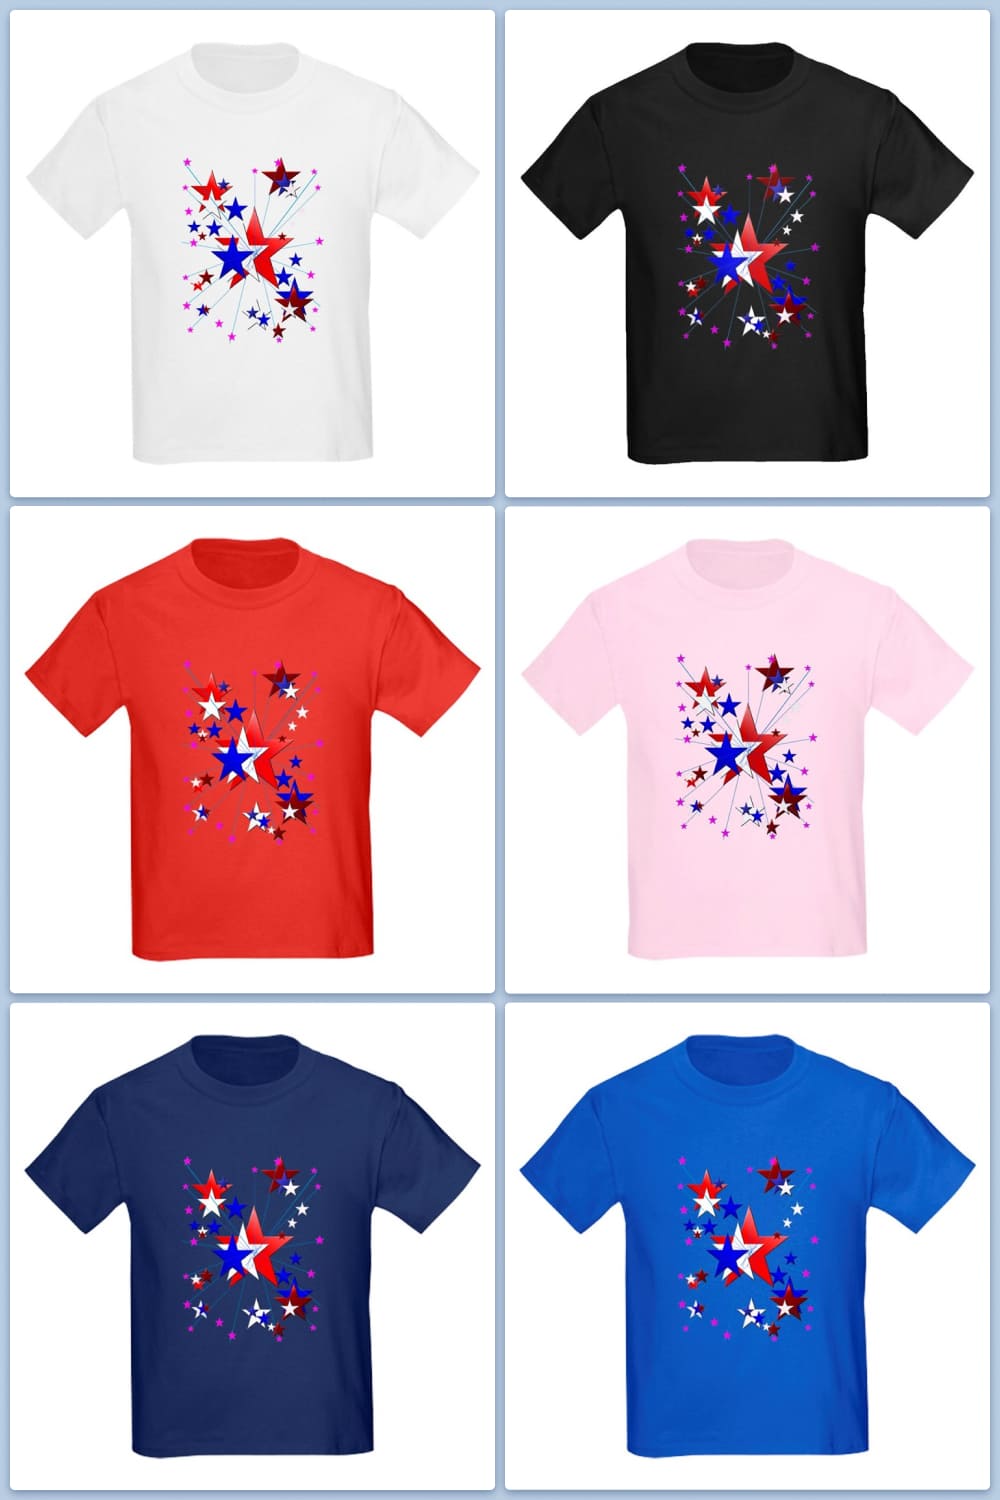 Collage of colorful t-shirts with colorful stars.